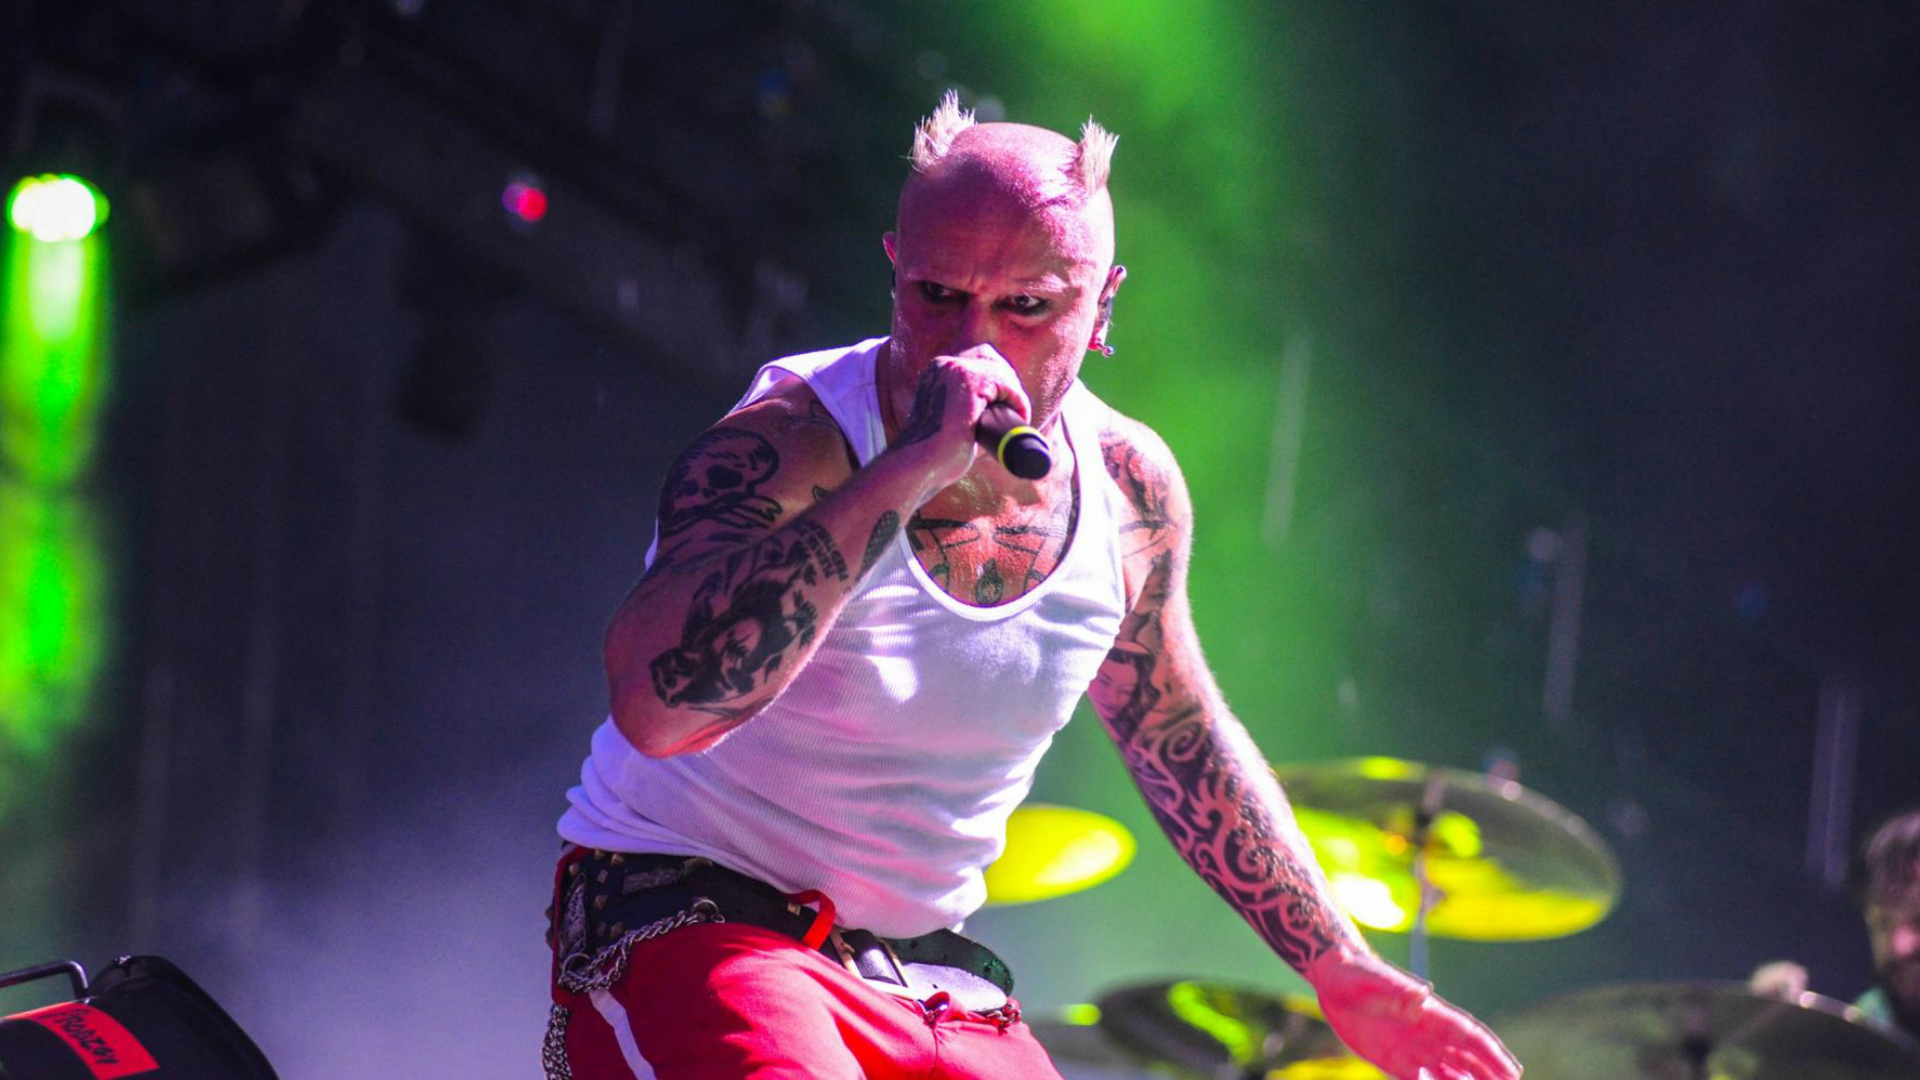 The Prodigy High Definition Wallpapers - Prodigy Live 1990s - HD Wallpaper 